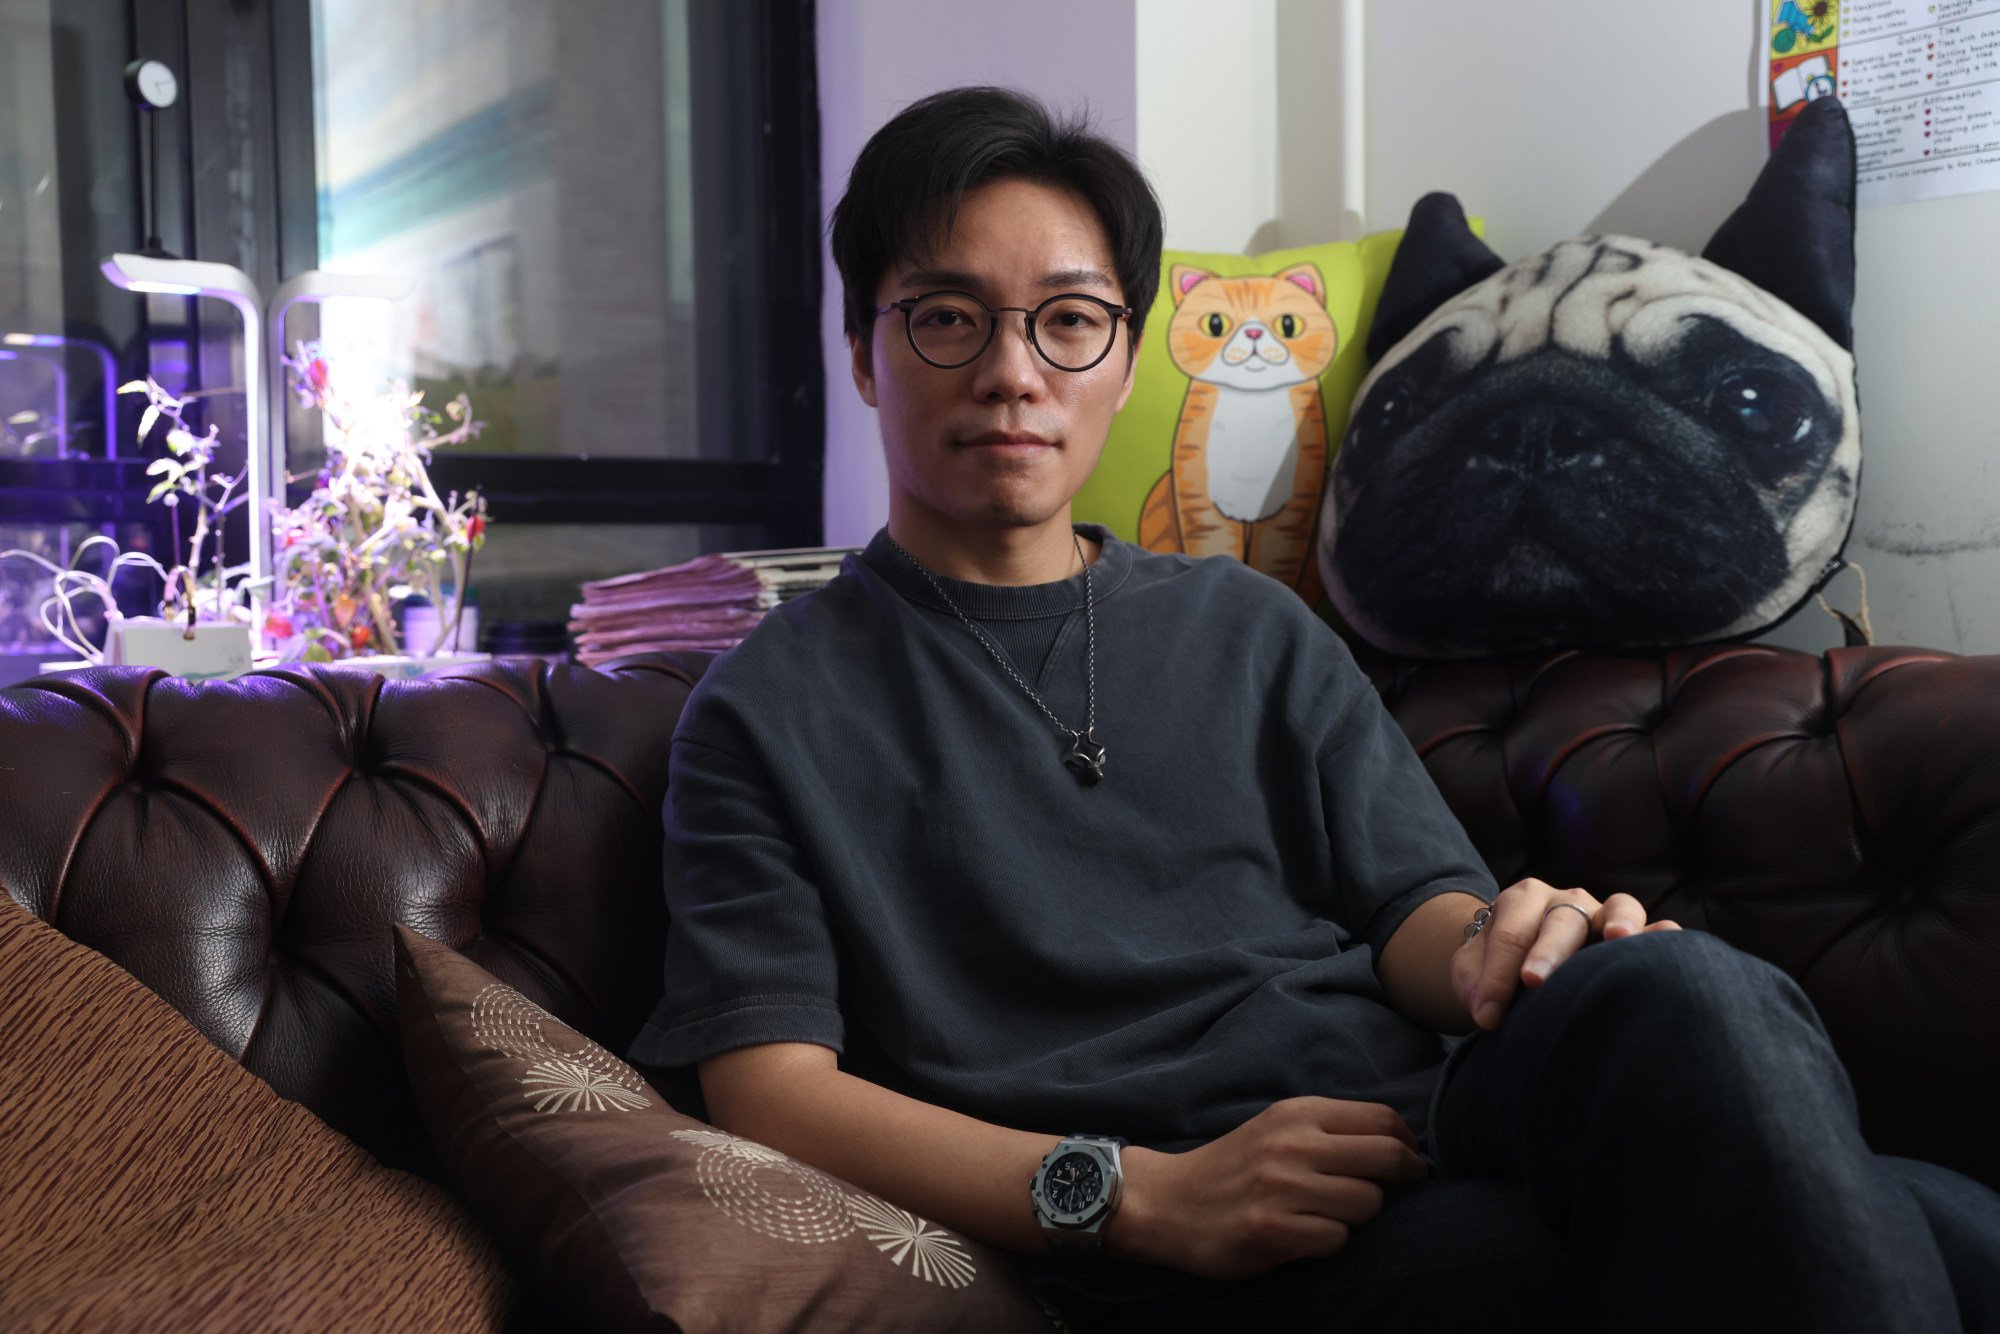 Dr Ken Fung says the divorce rate partly reflects a “fast-food dating culture”, where couples marry too quickly after meeting online. Photo: Yik Yeung-man